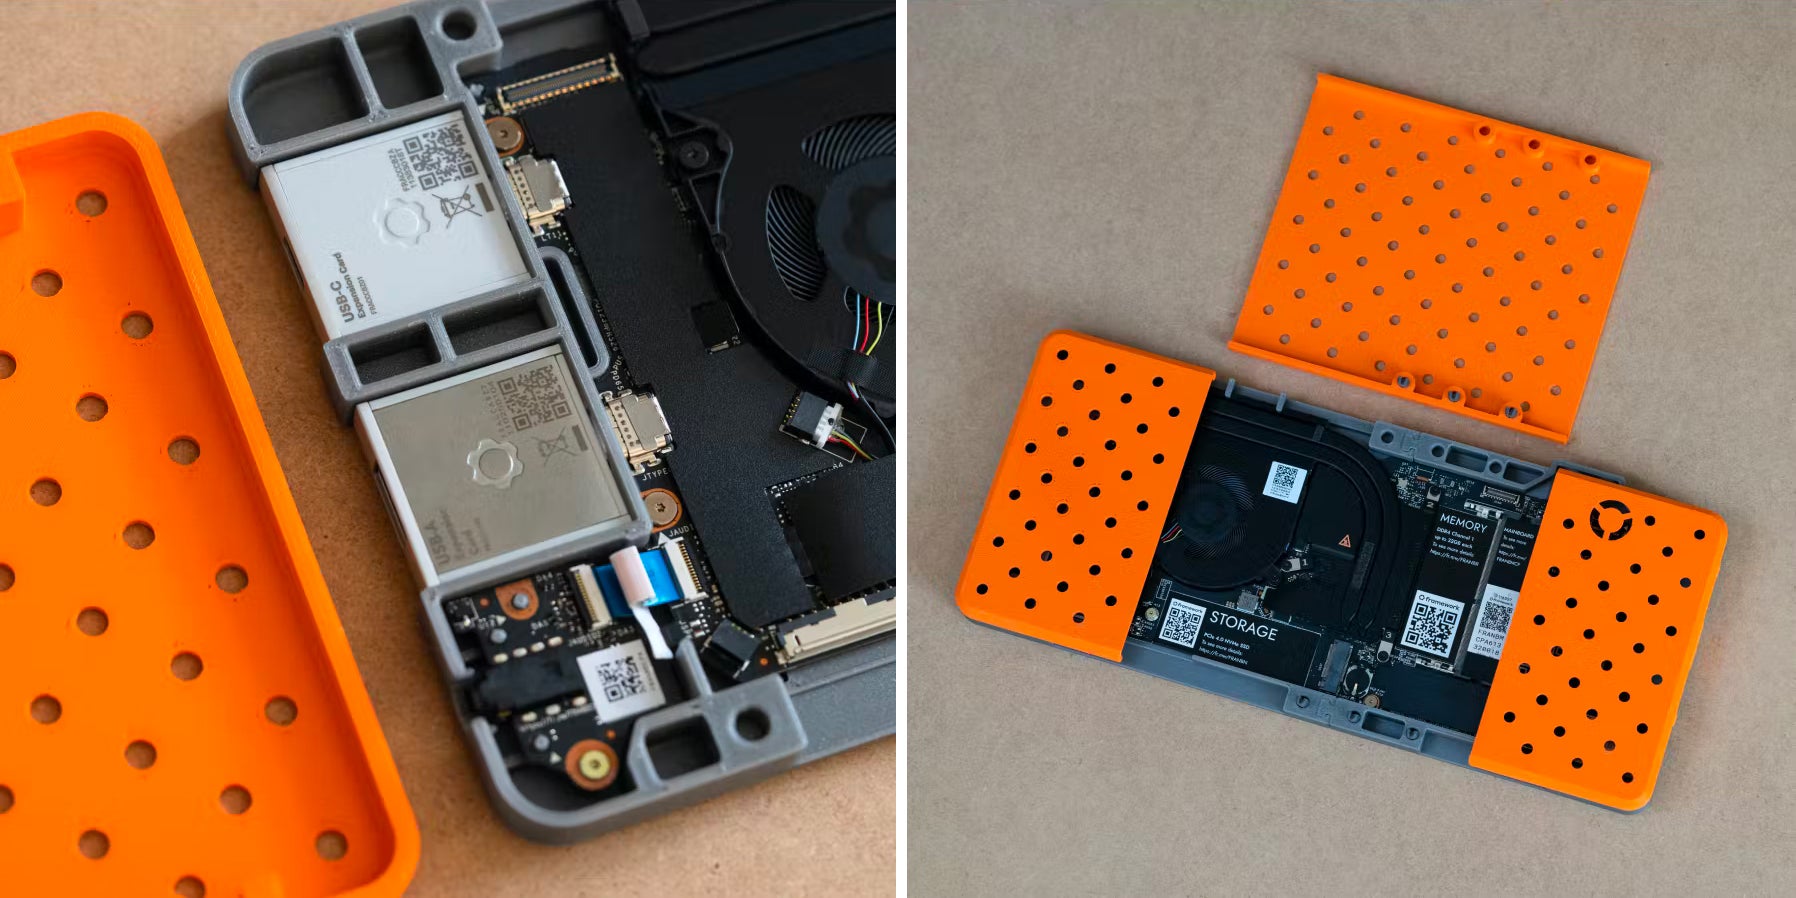 You Can Now Buy This Modular Laptop’s Mainboard for Your Own Frankenstein Project